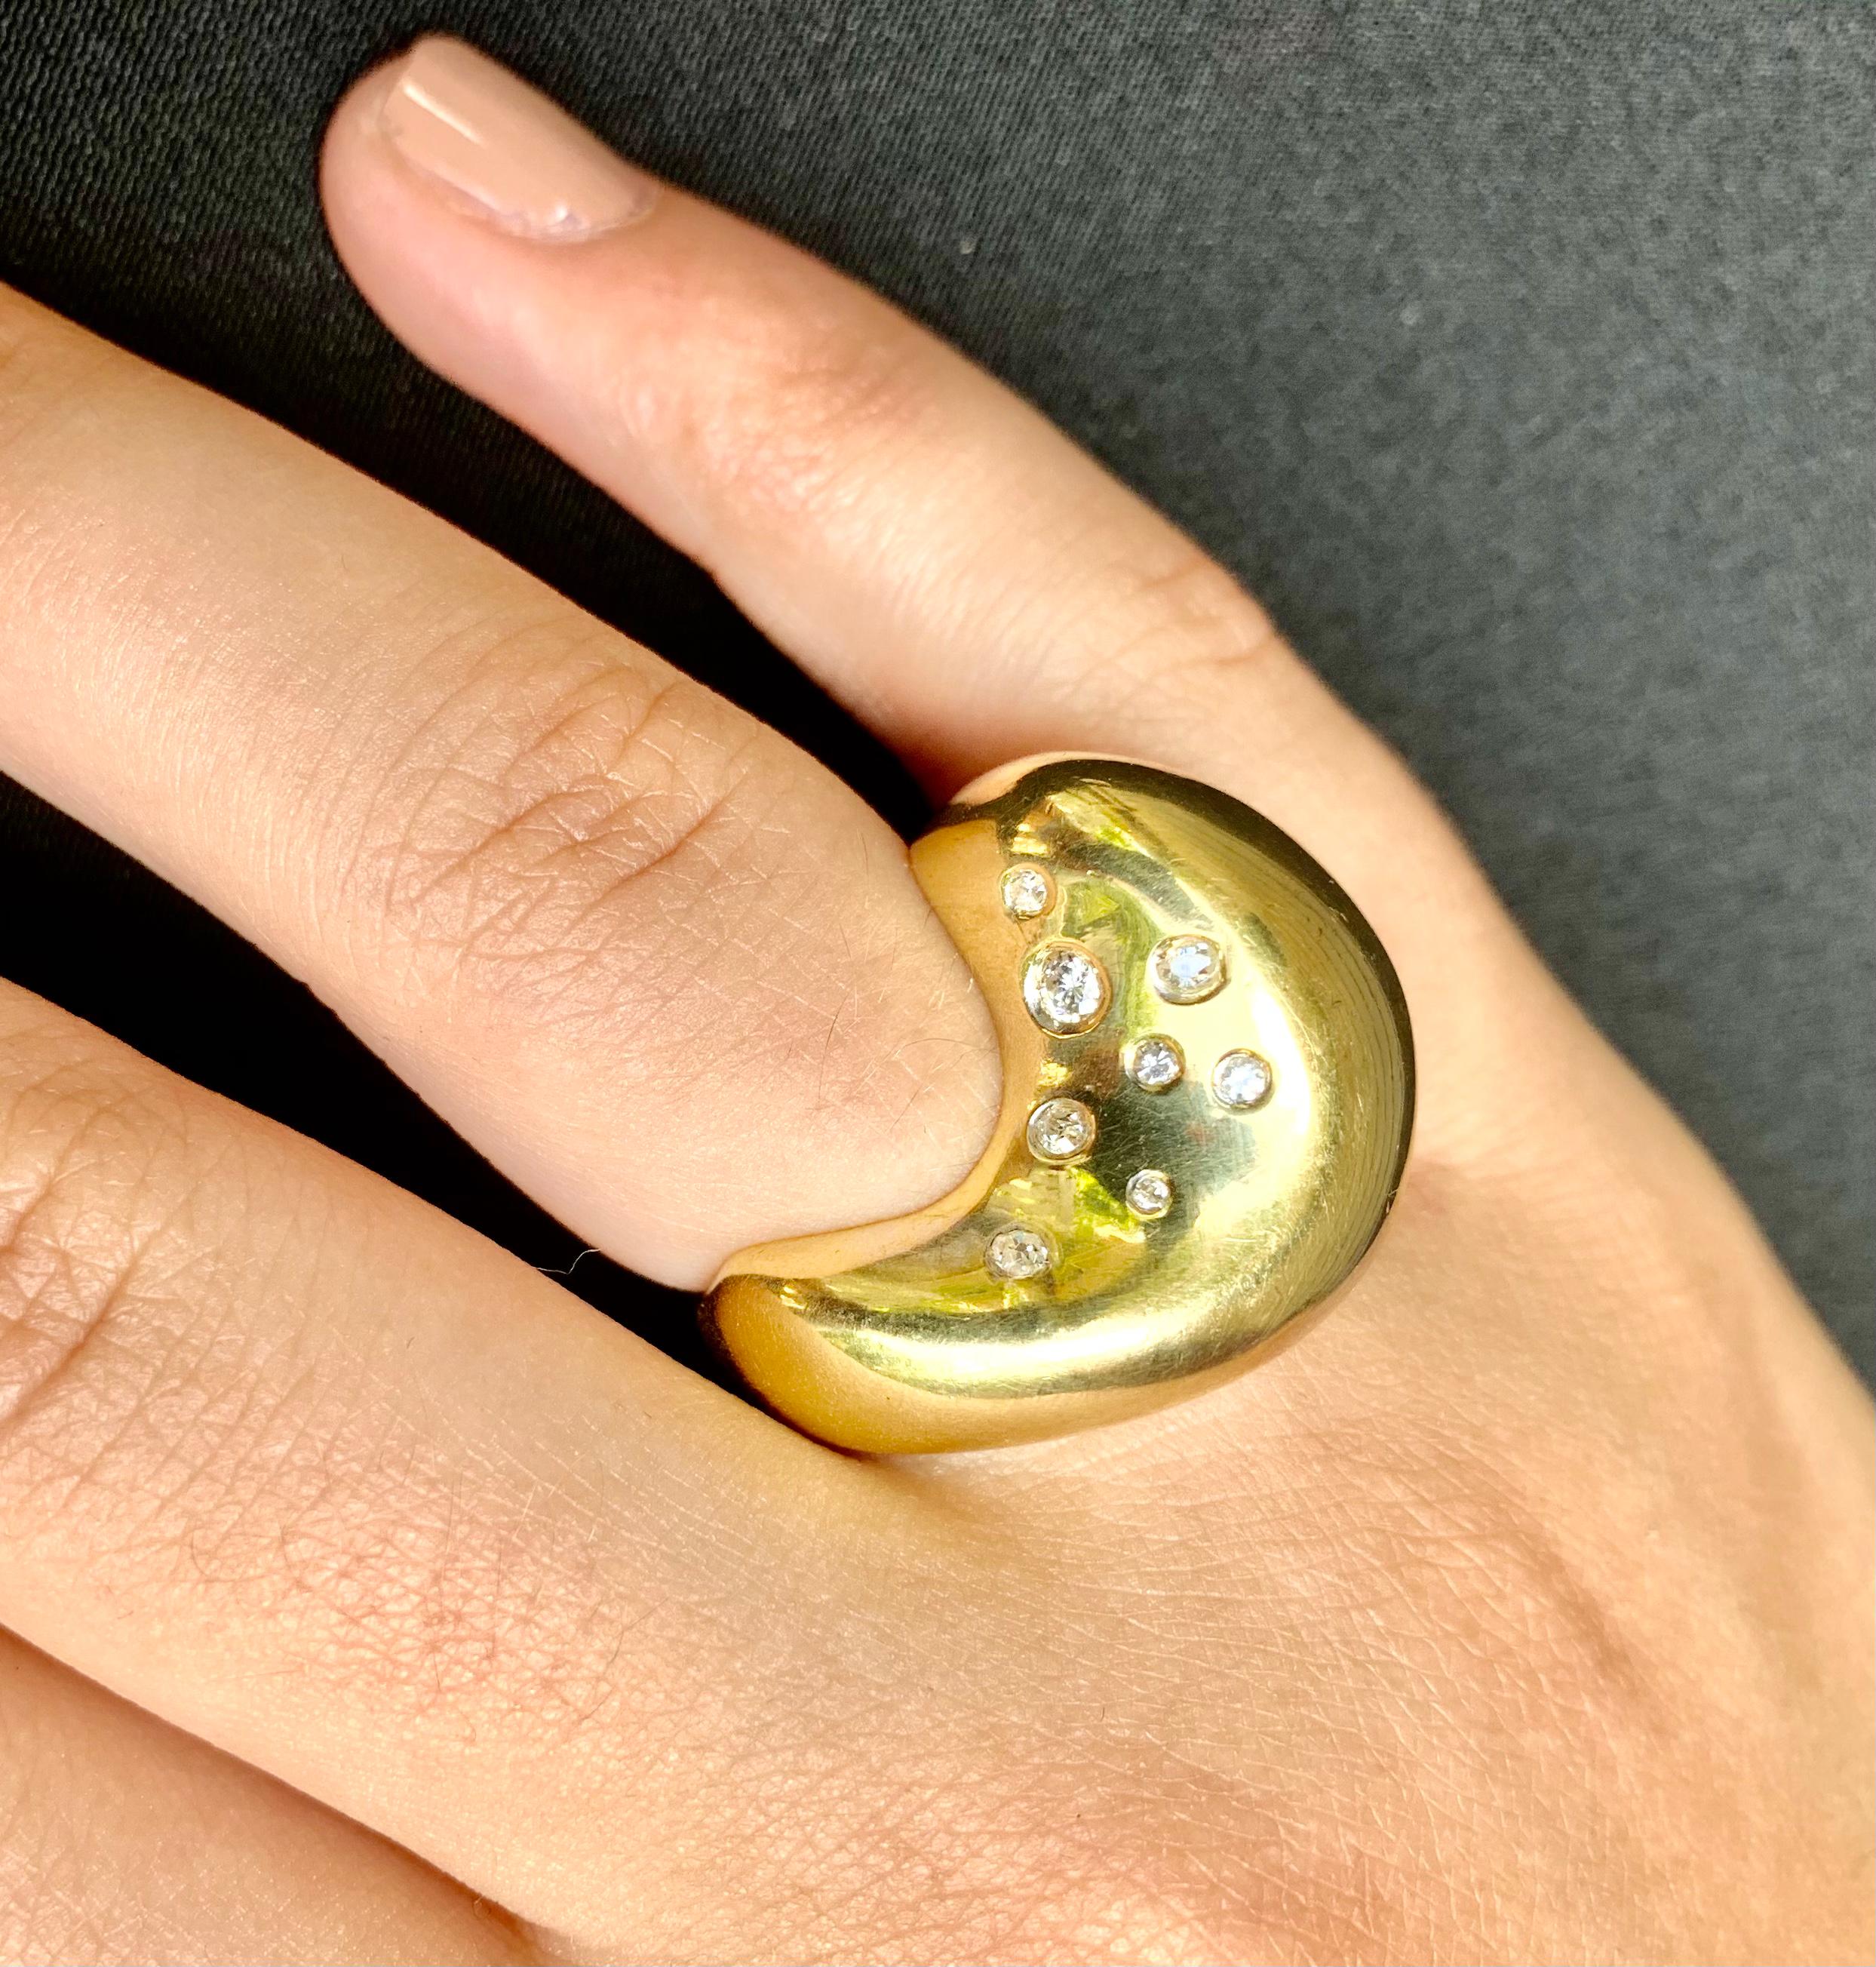 
Large, unusual, artistic 18K yellow gold and diamond Celestial Constellation statement ring. 
This beautiful ring depicts a stylized moon set with a diamond star on one side and a constellation of eight diamond stars on the other. Celestial jewelry